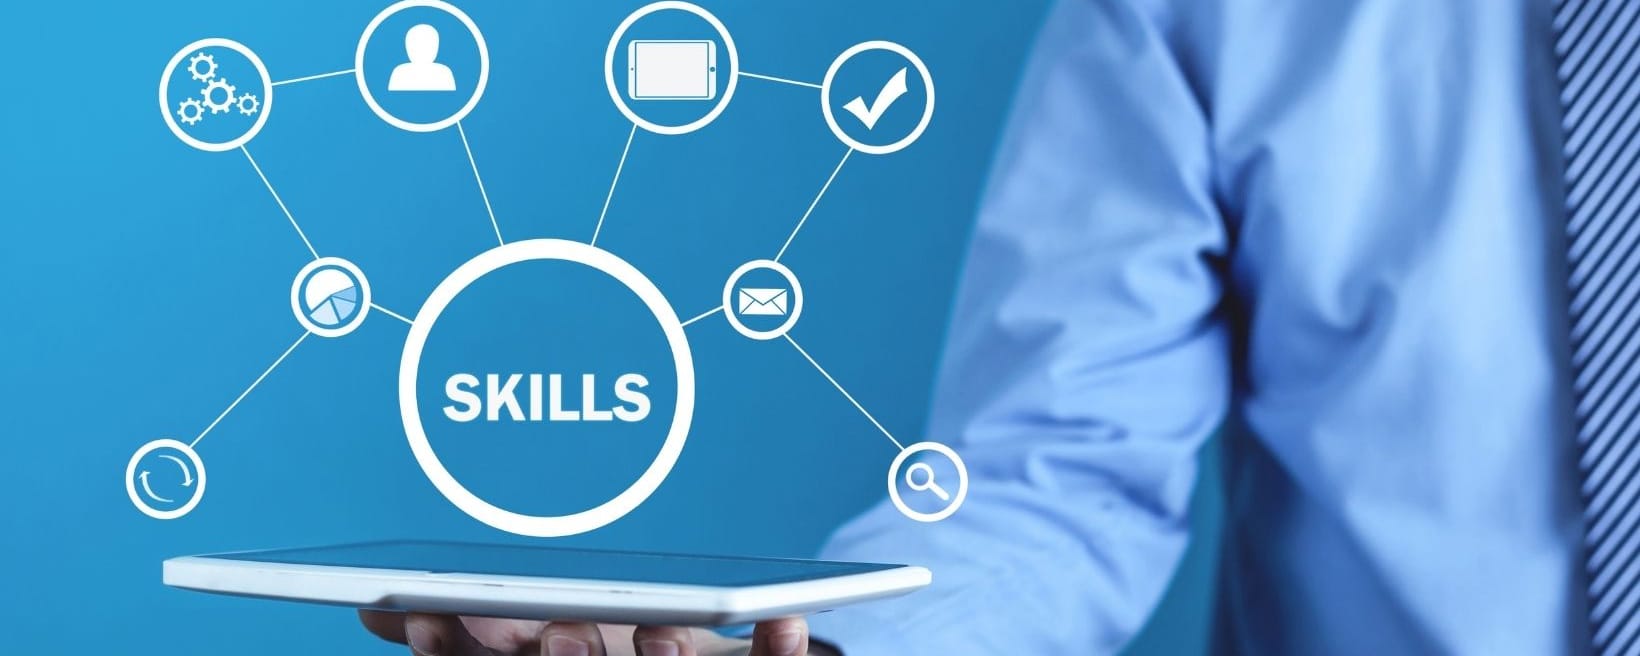 Web graphic with a skills network